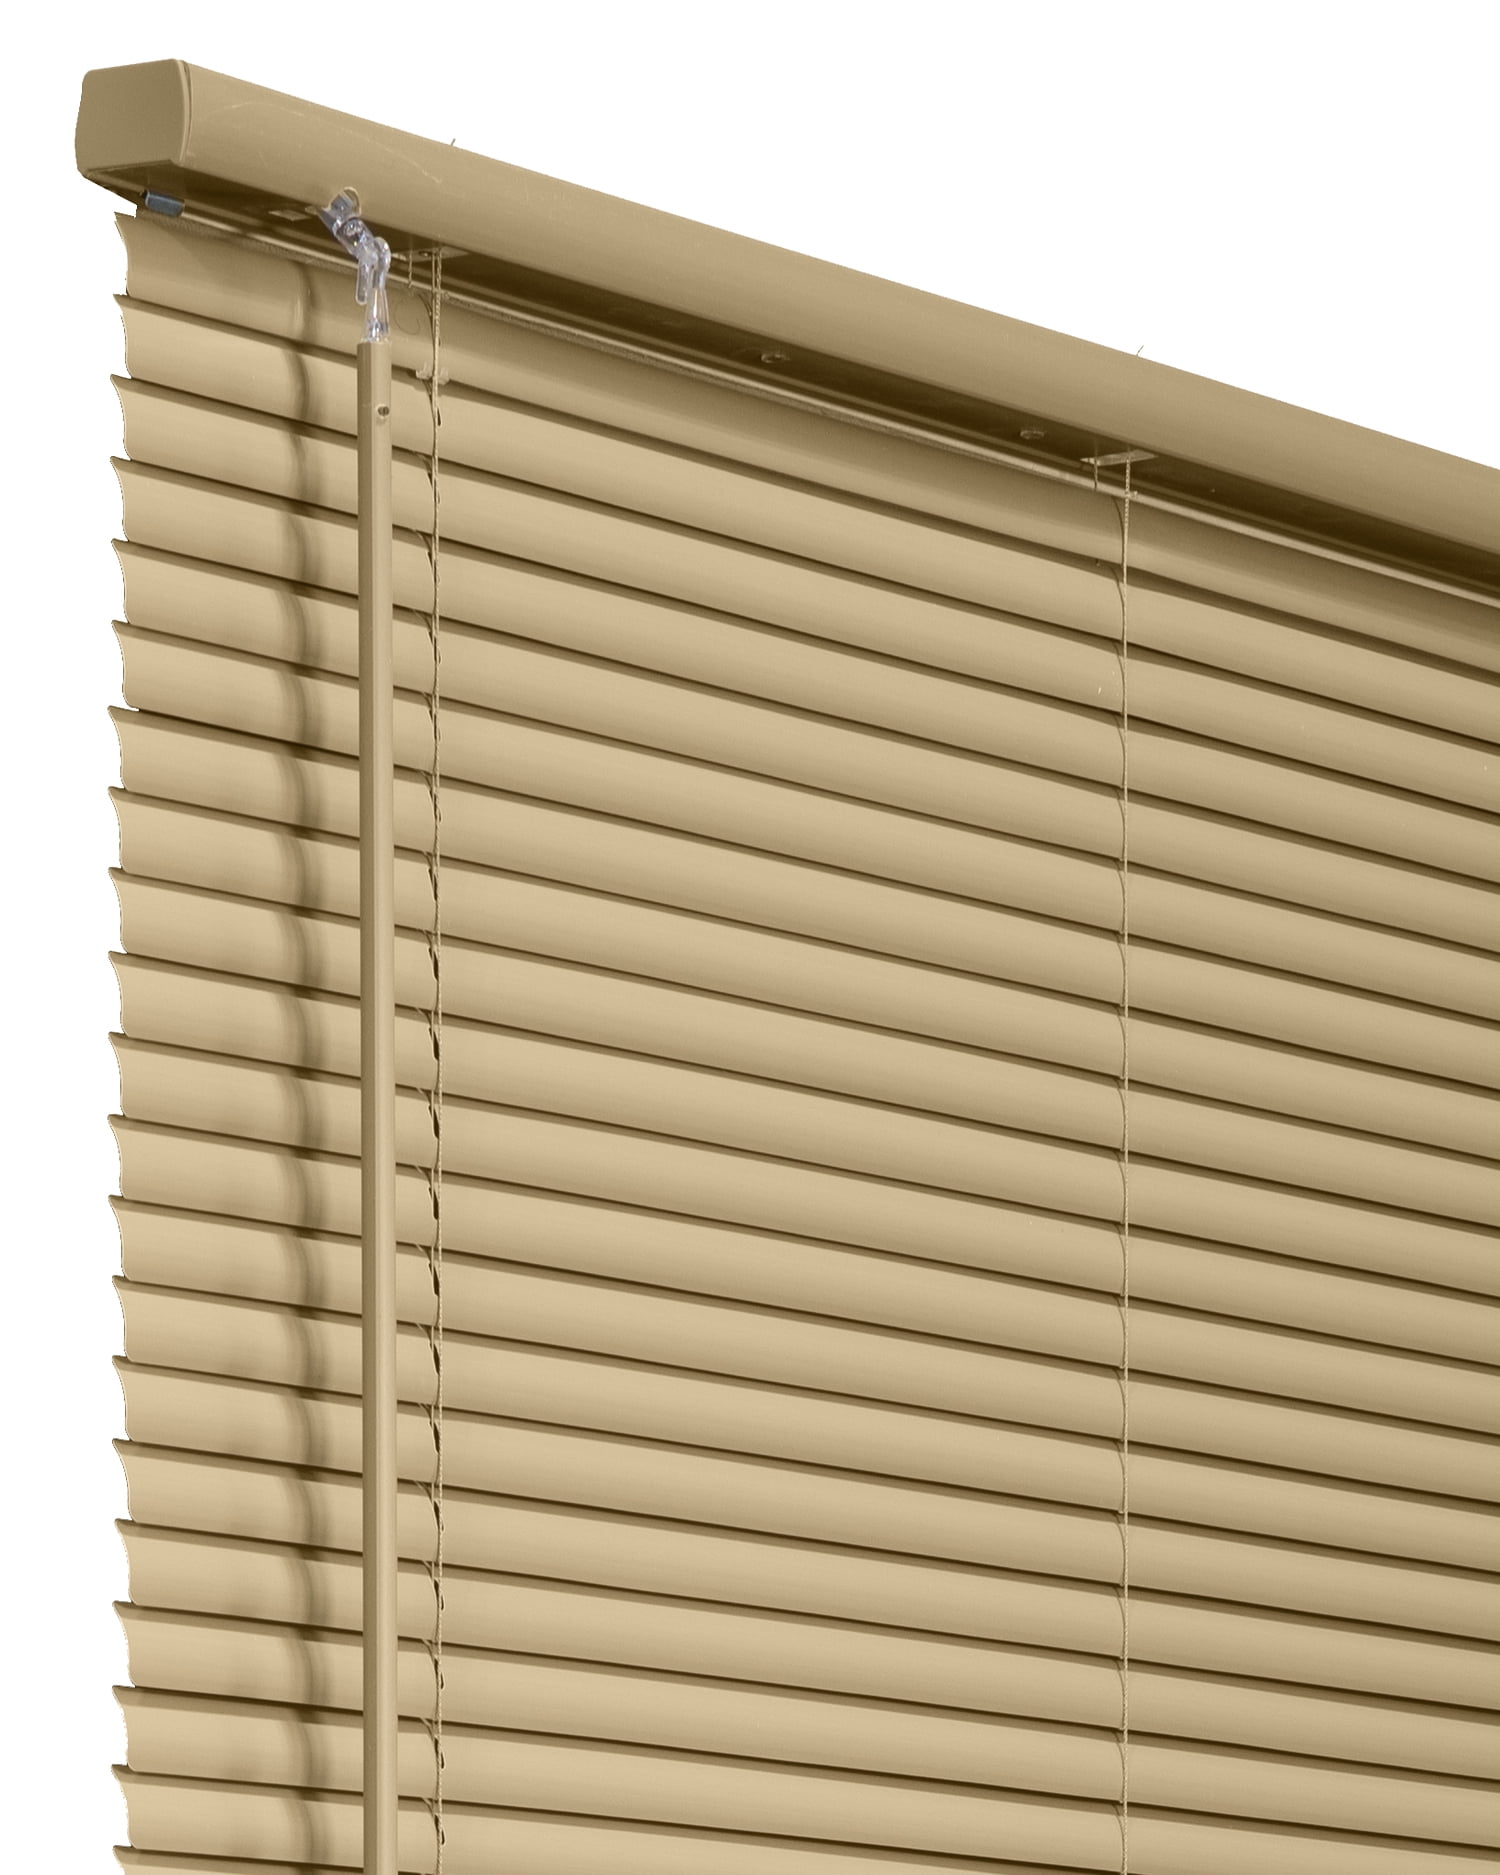 VERTICAL BLIND FABRIC DAWN MINI FOR SLATS BLADES KIDS ROOM WITH BOTTOM WEIGHTS